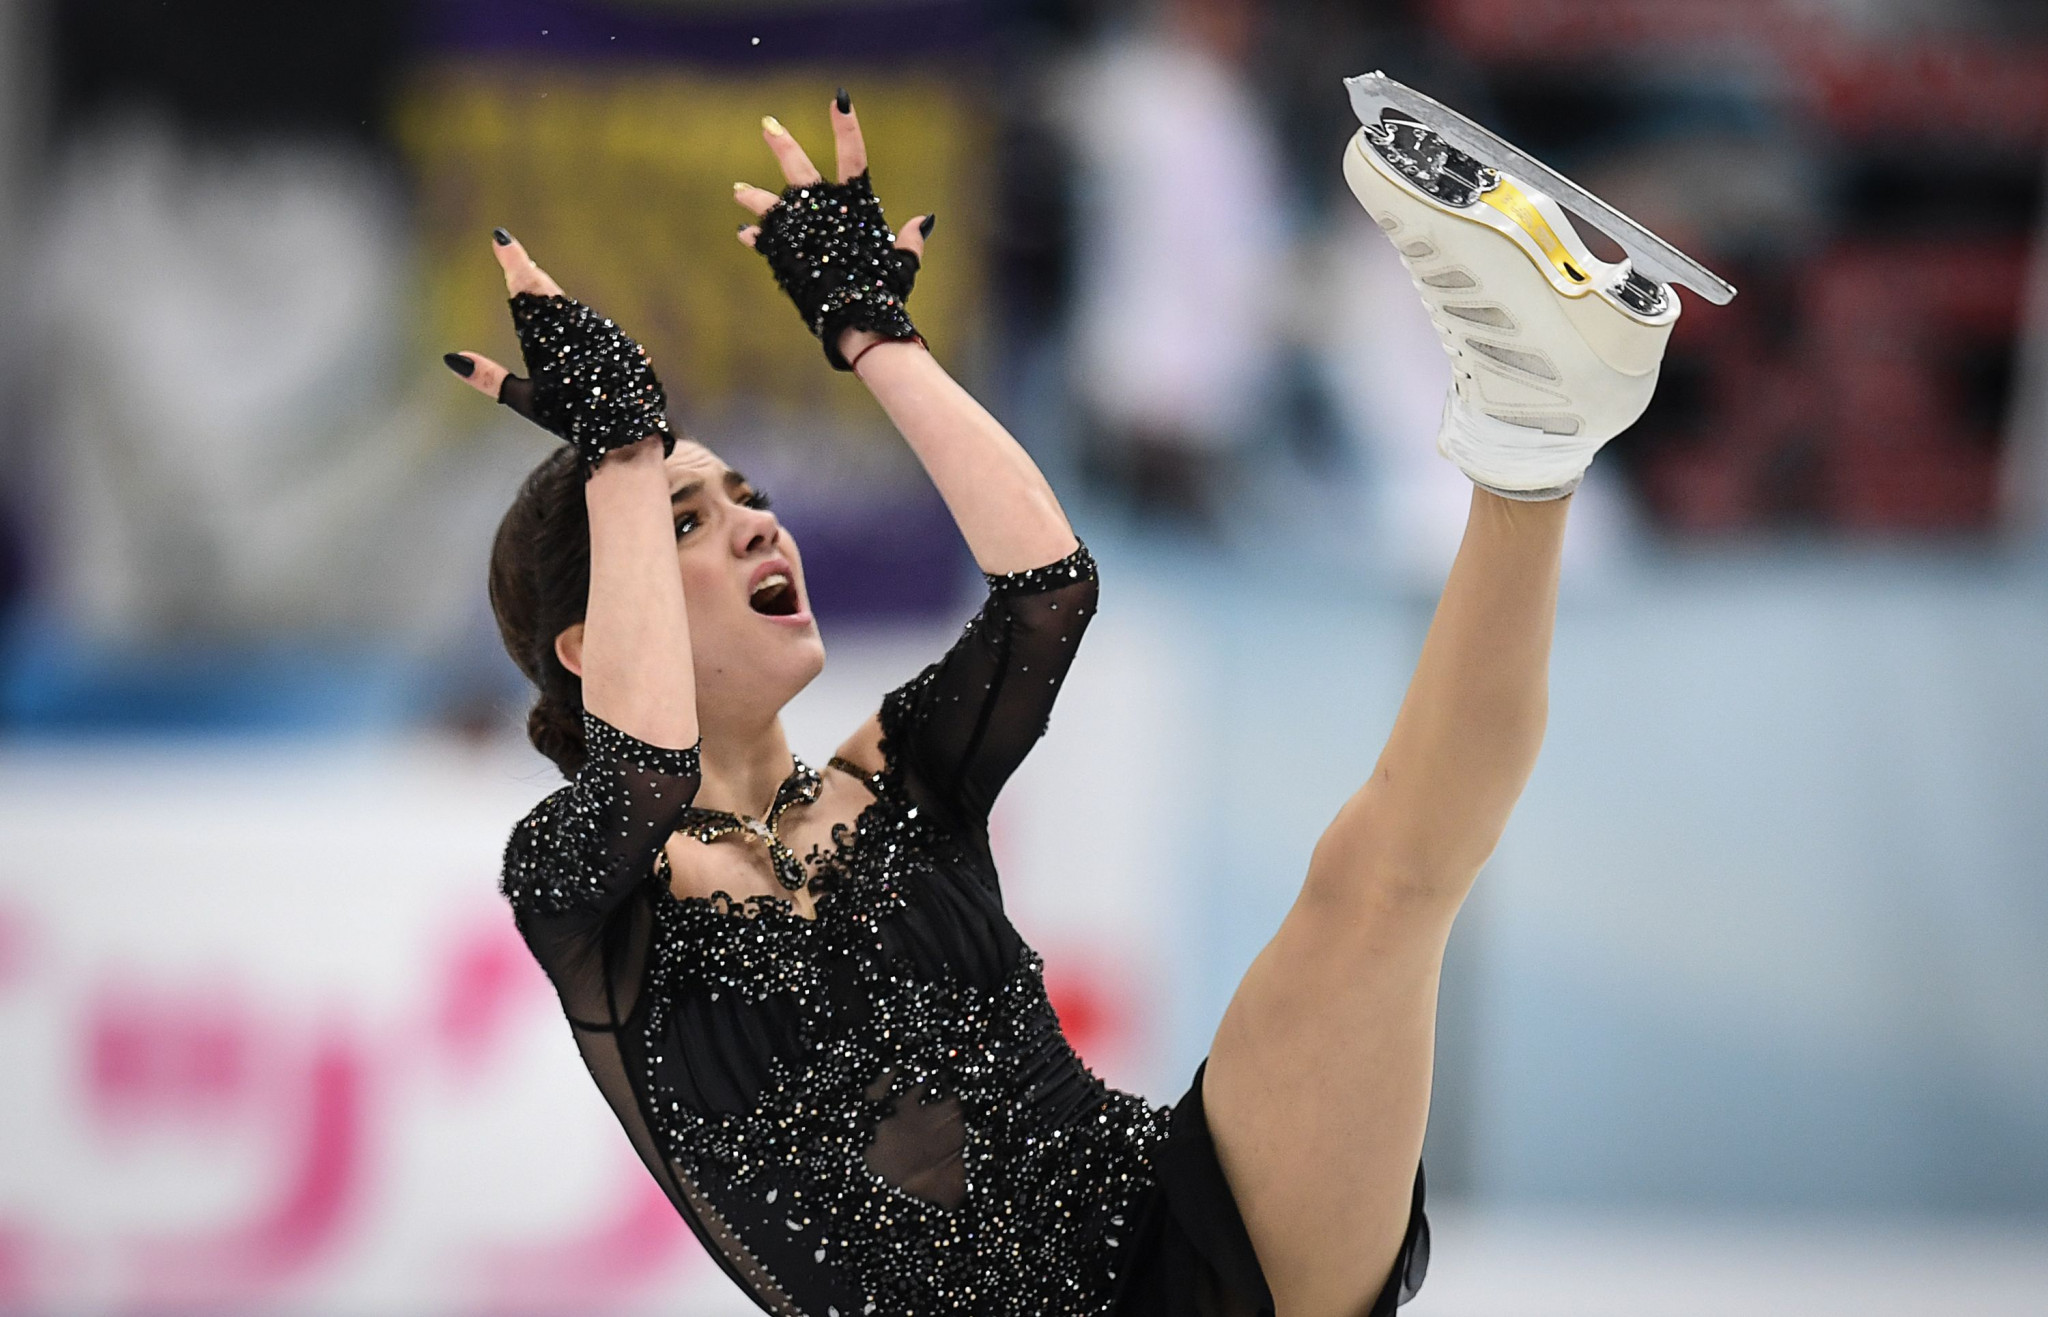 Evgenia Medvedeva took gold in the women's competition ©Getty Images